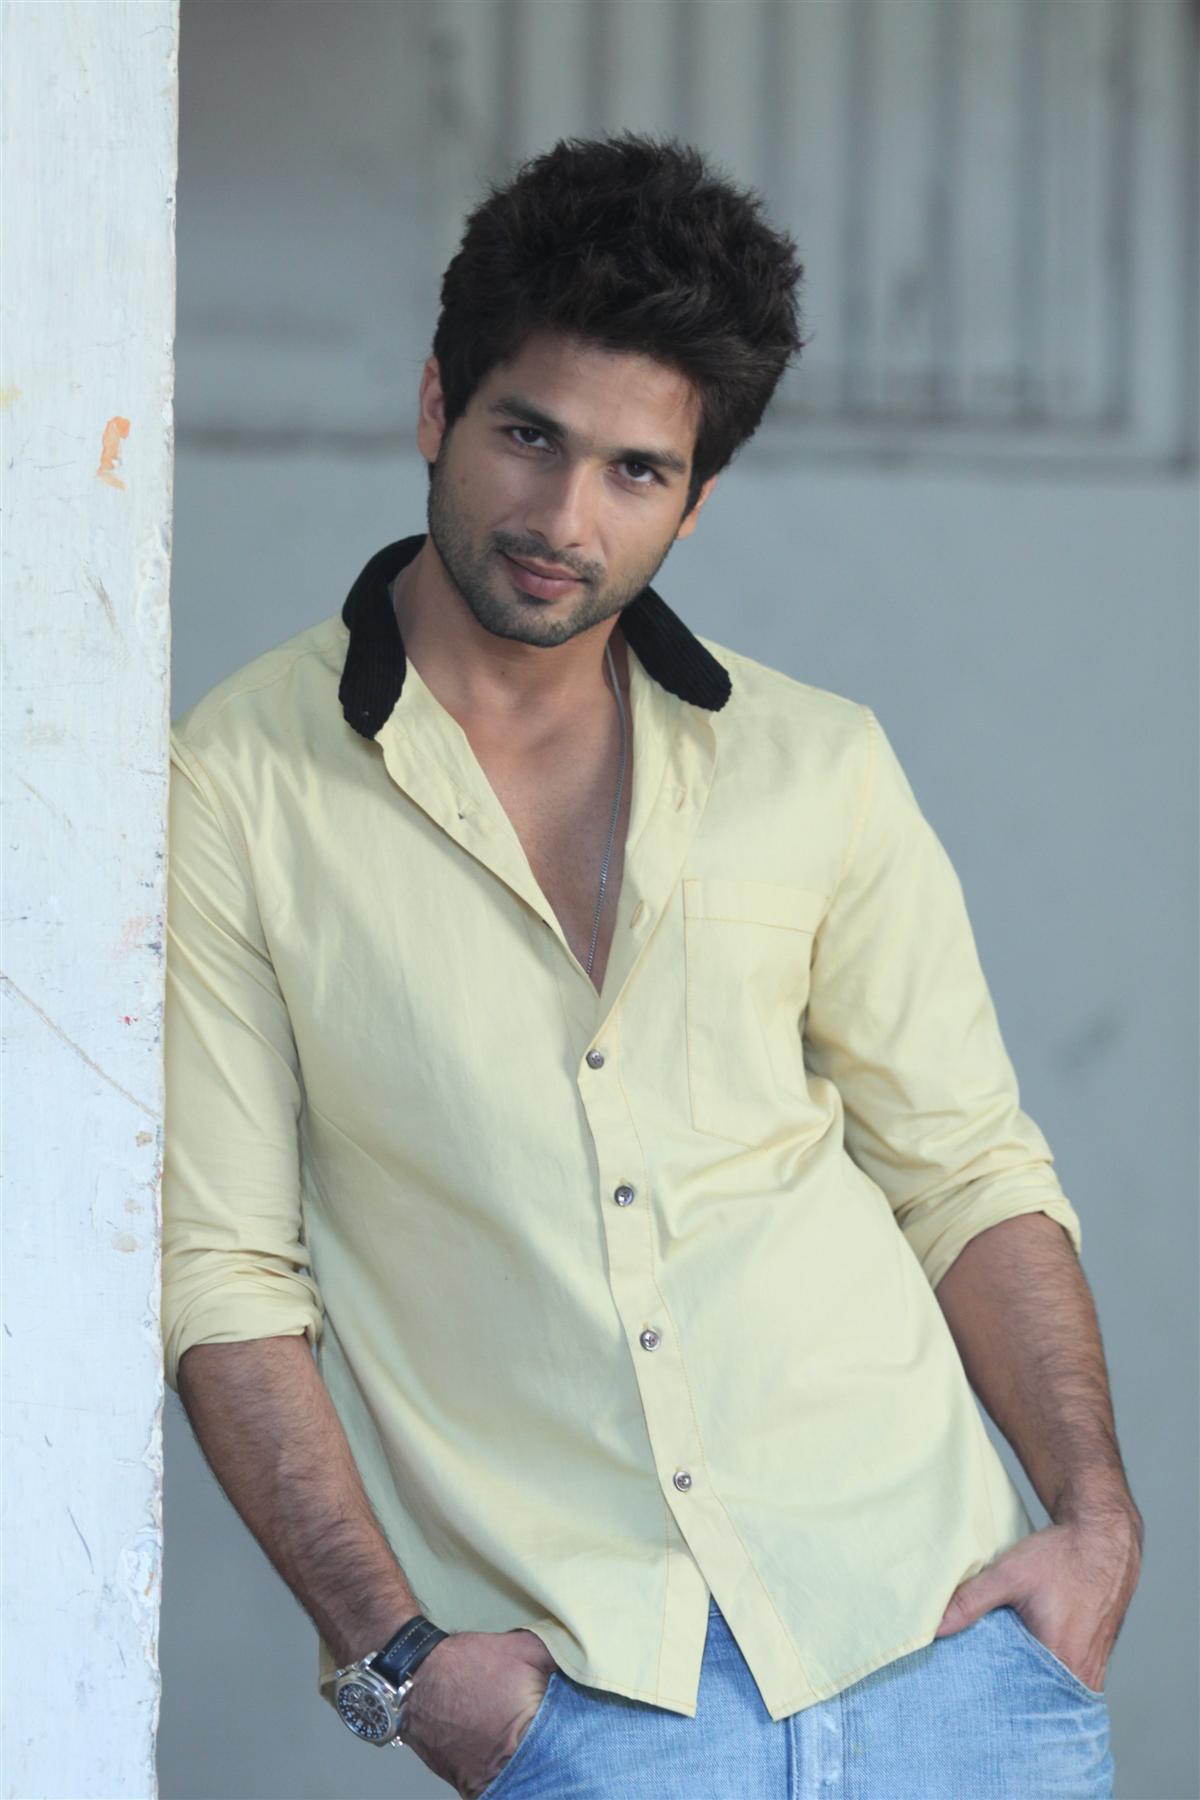 Shahid Kapoor Photos Images Wallpapers Pics Download